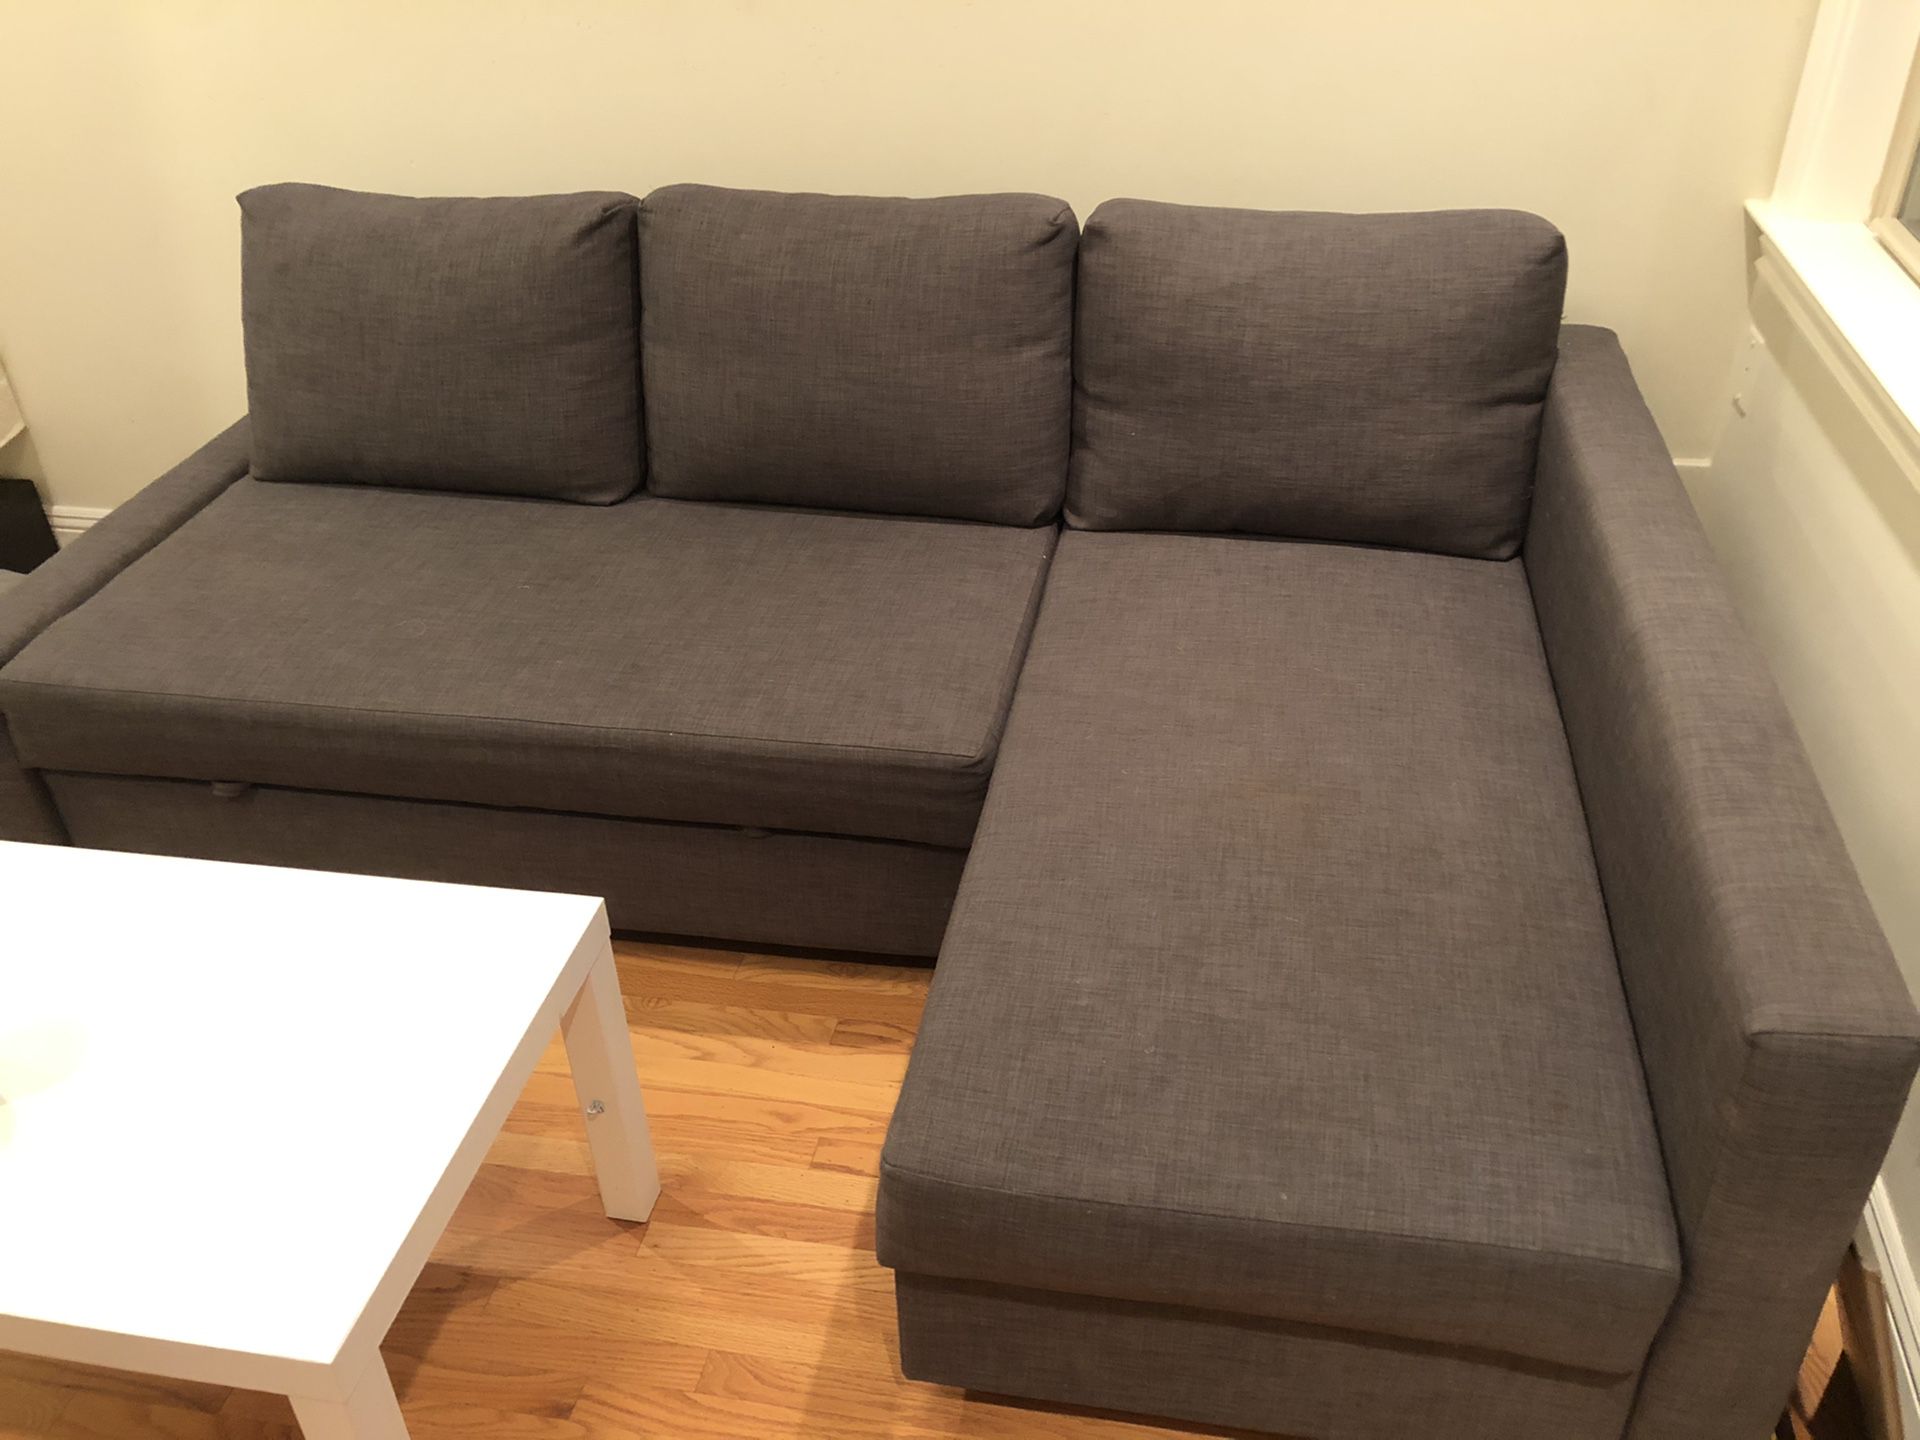 Ikea sectional pull out couch